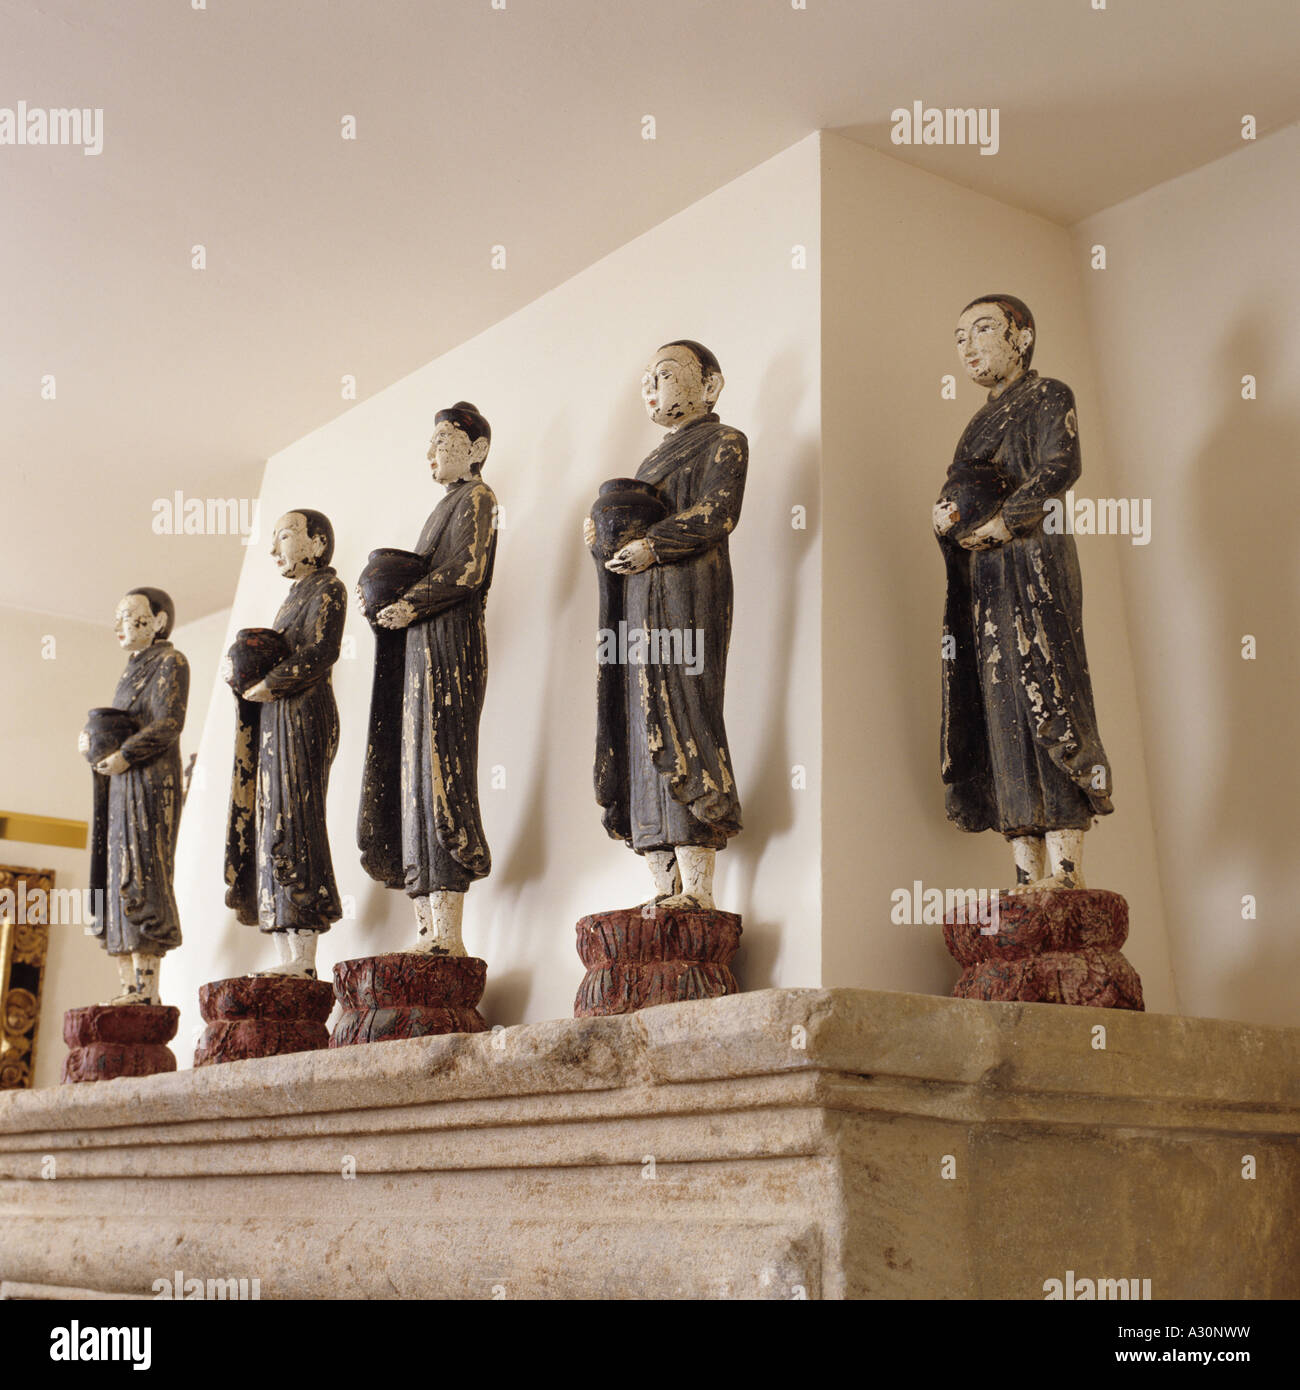 Row of Chinese figurines on a stone mantelpiece Stock Photo